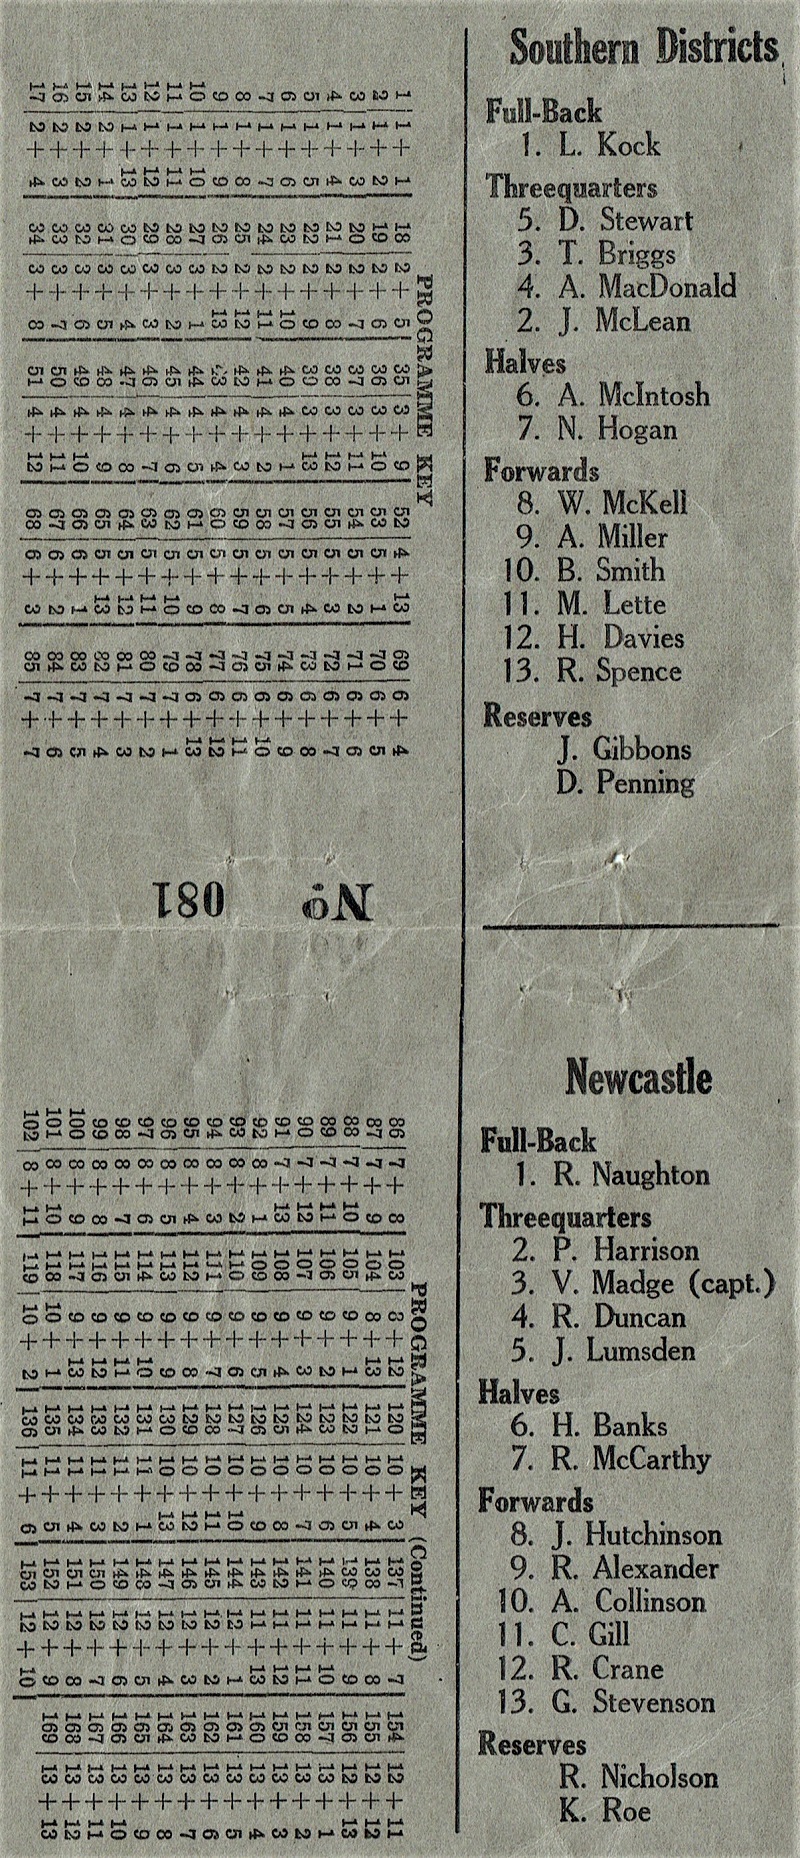 Newcastle vs Southern Division 1950 (2)